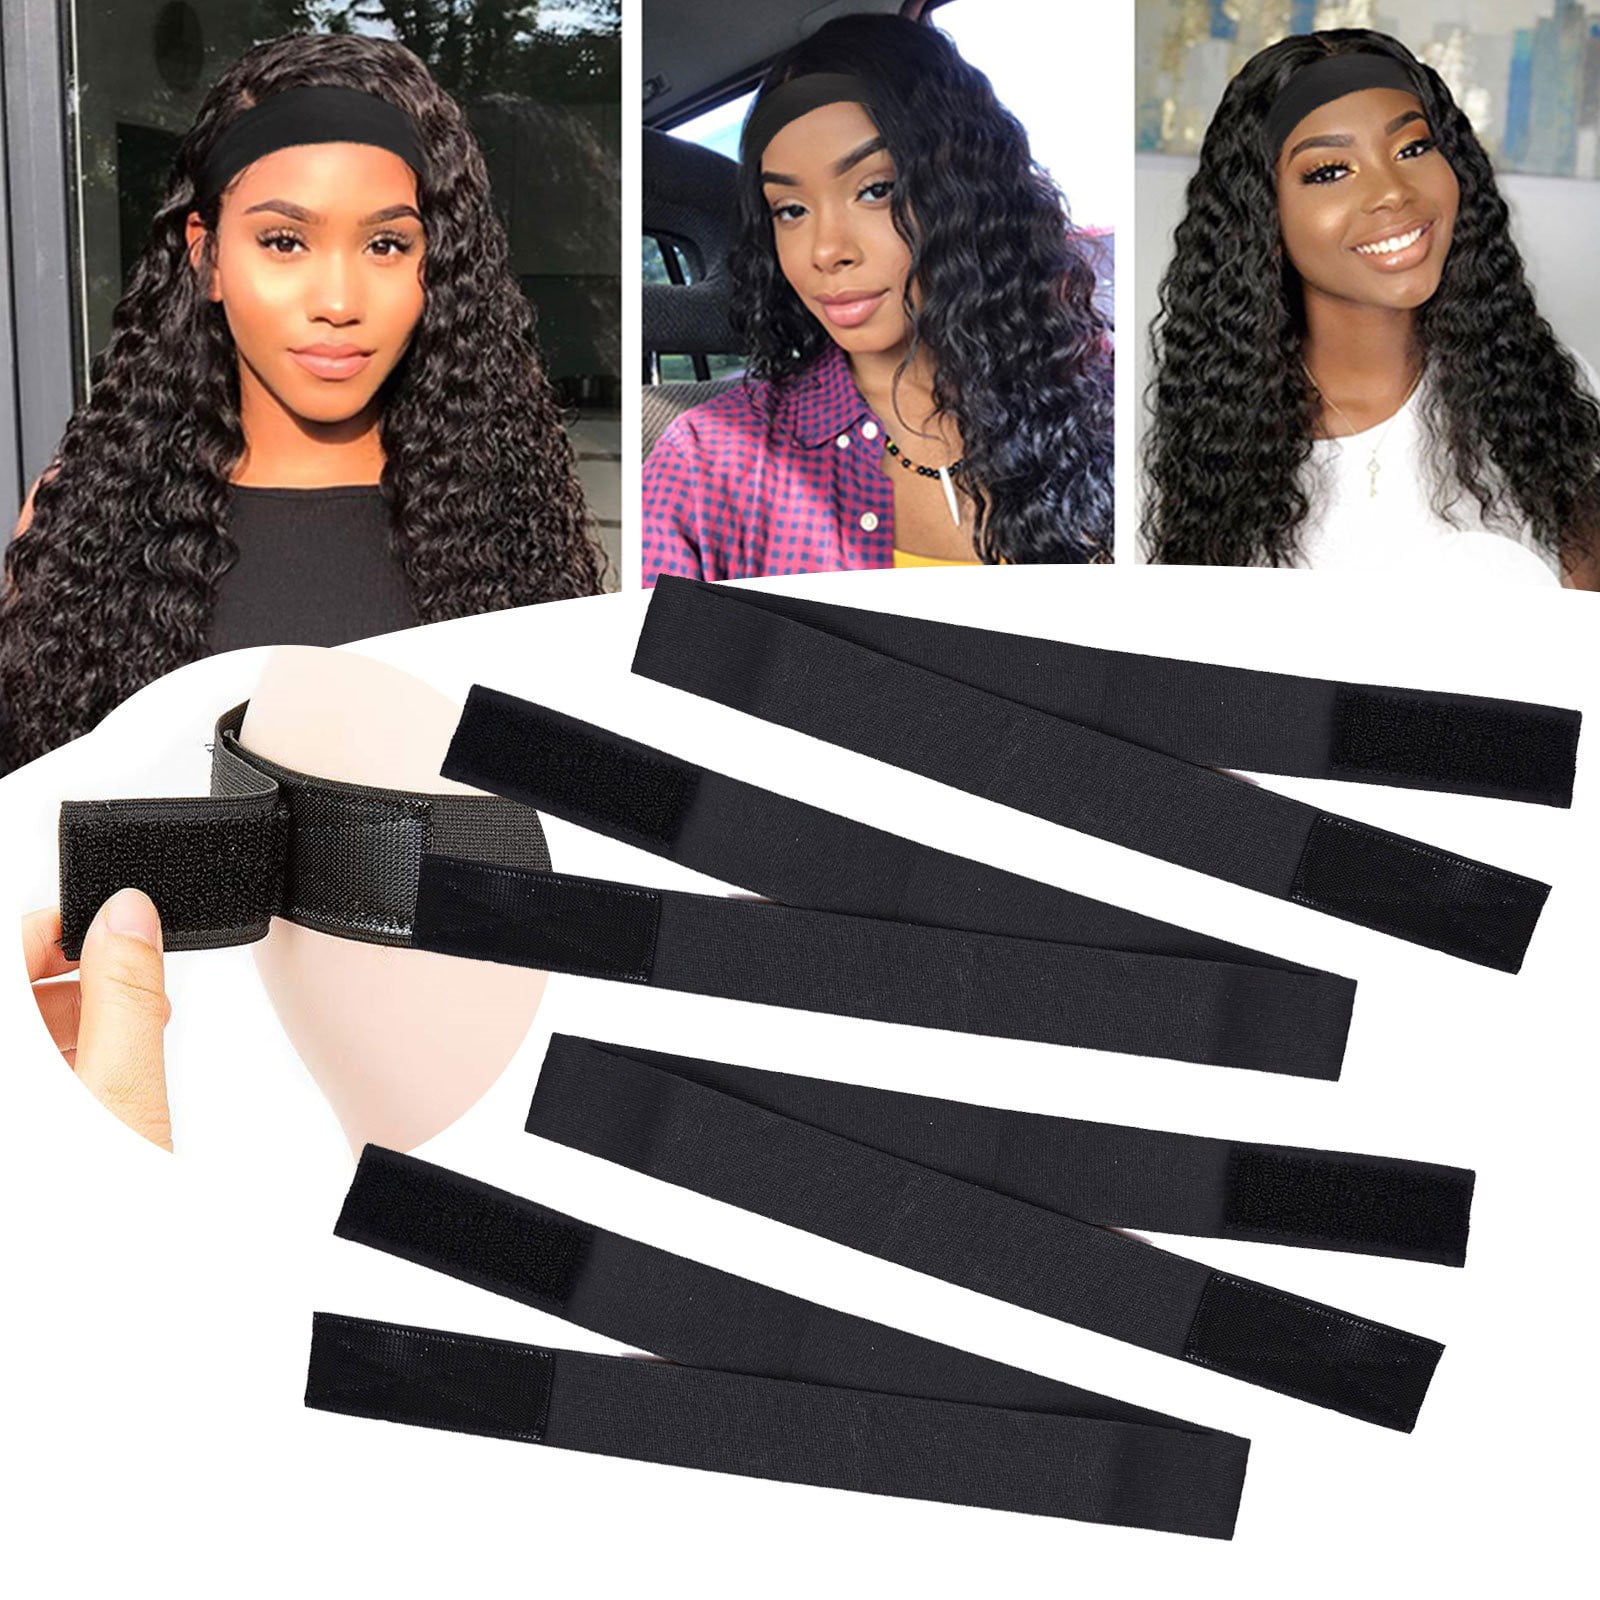  Atimiaza 2 Pcs Elastic Bands for Wig, Bow Tie Lace Melting  Band, Wig Band for Melting Lace, Melting Band for Lace Front, Melt Band for  Lace Wigs, Edge Wrap to Lay